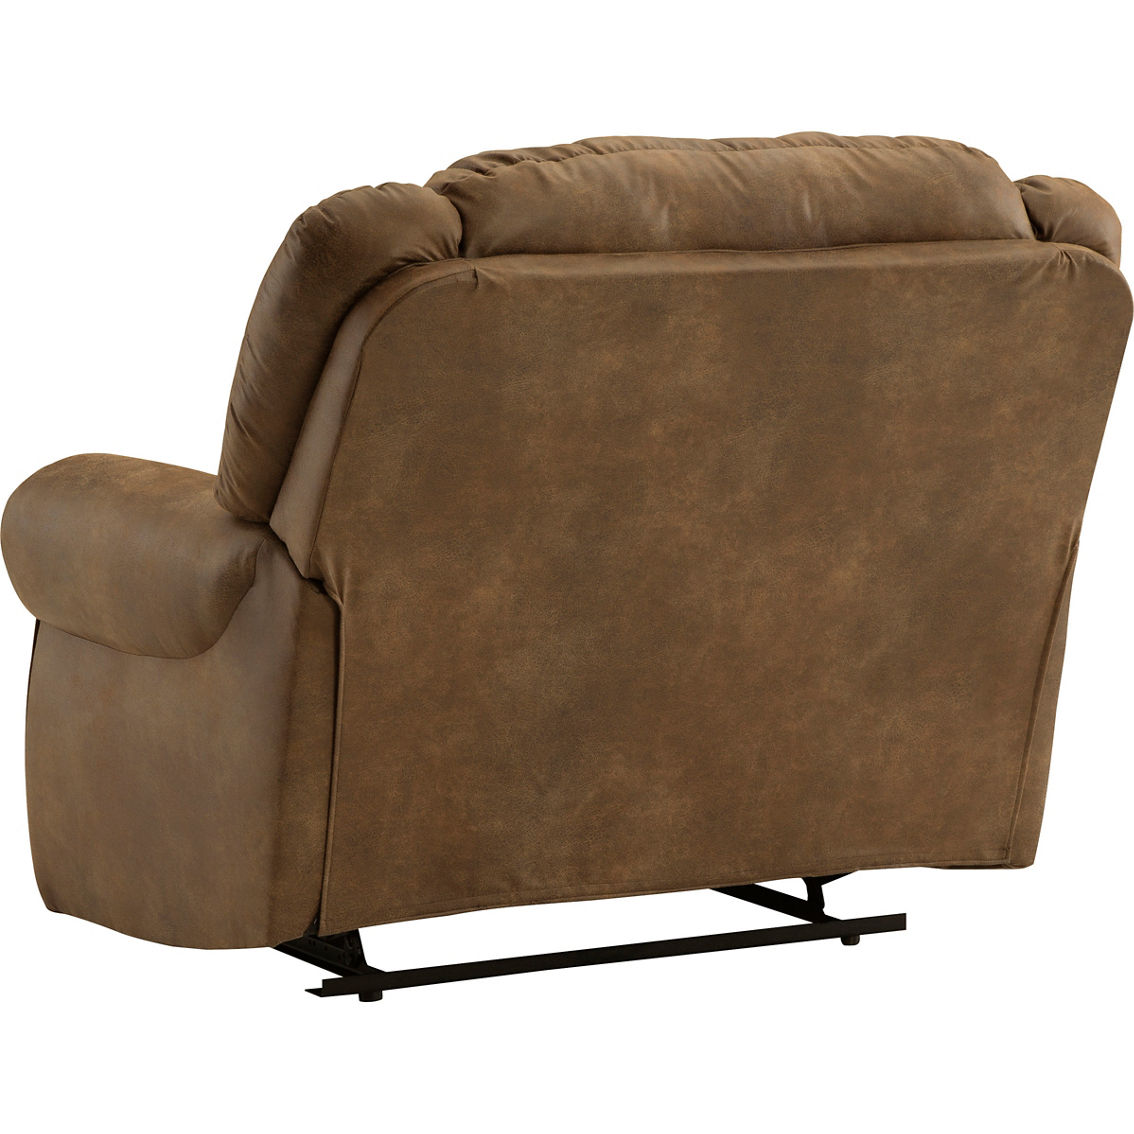 Signature Design by Ashley Boothbay Oversized Recliner - Image 2 of 8